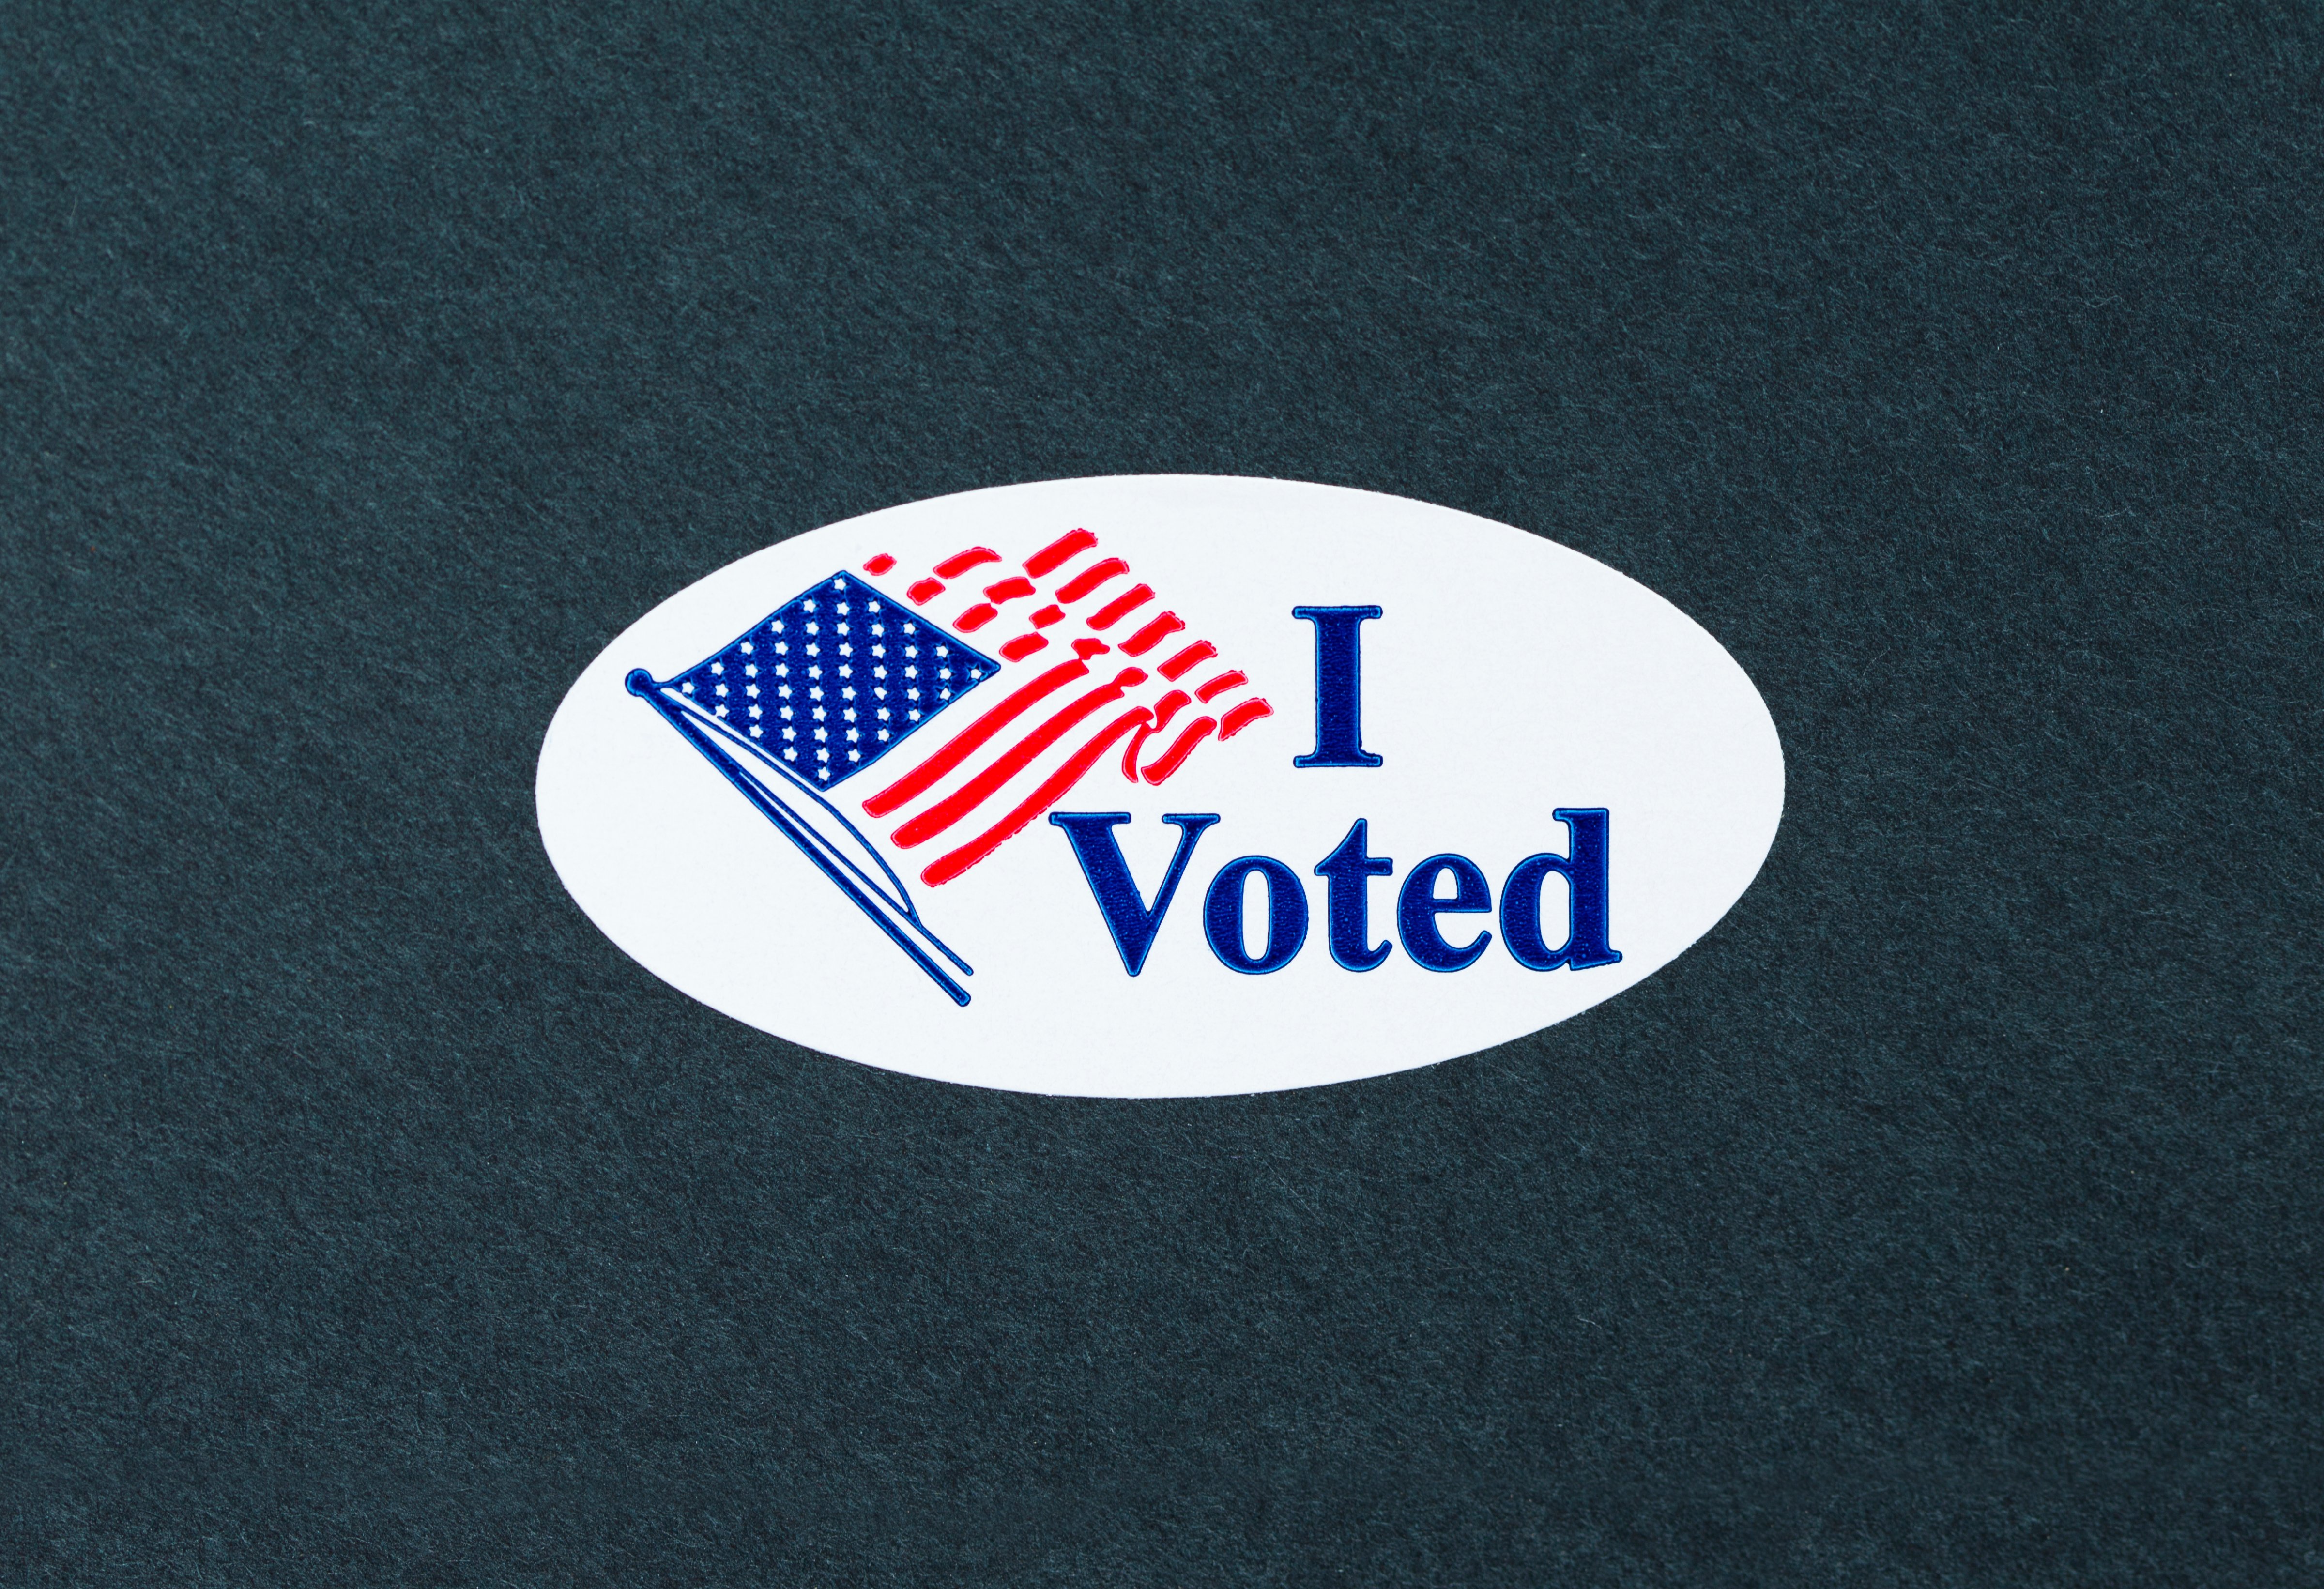 'I Voted' sticker on the black background. (Getty Images)